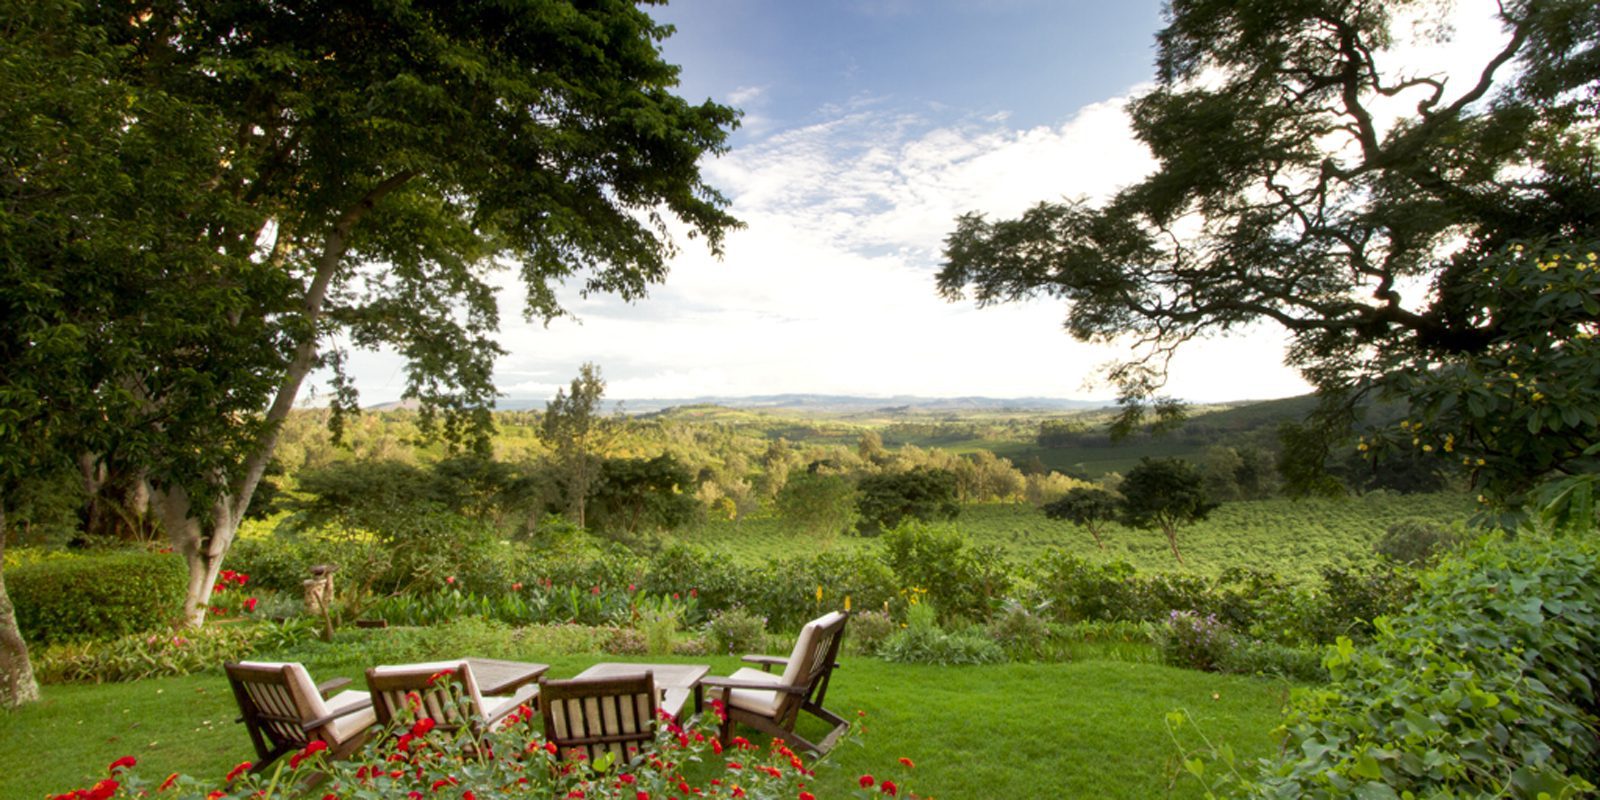 chairs set up in a green field overlooking a view with trees